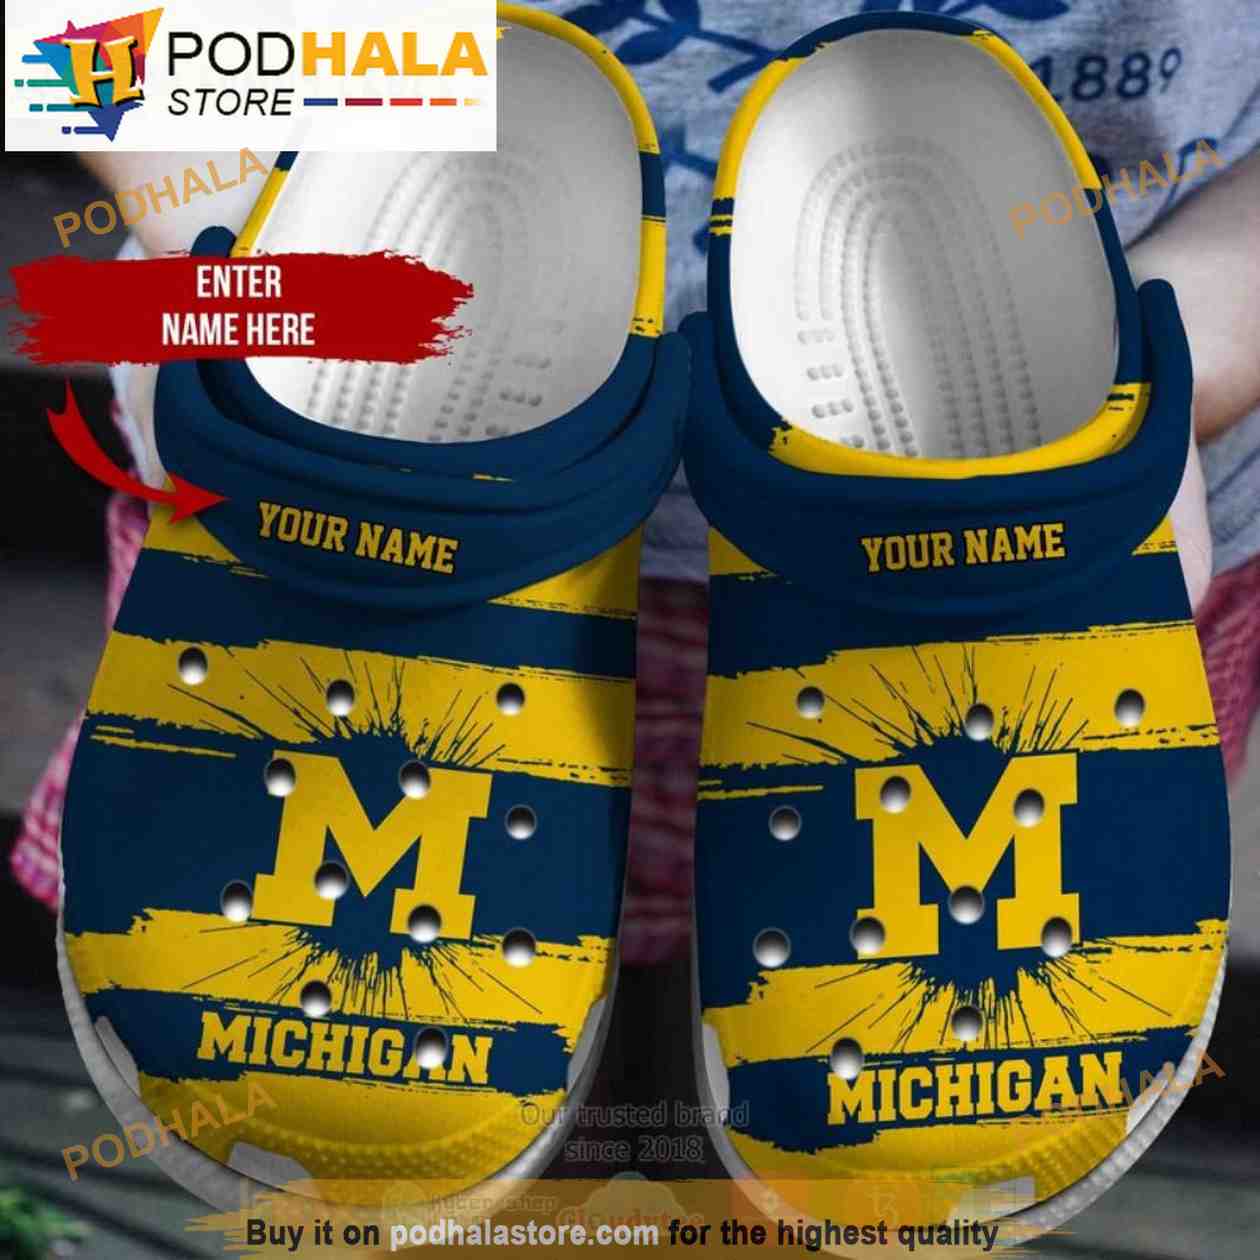 NCAA Michigan Wolverines Clog Slippers - M